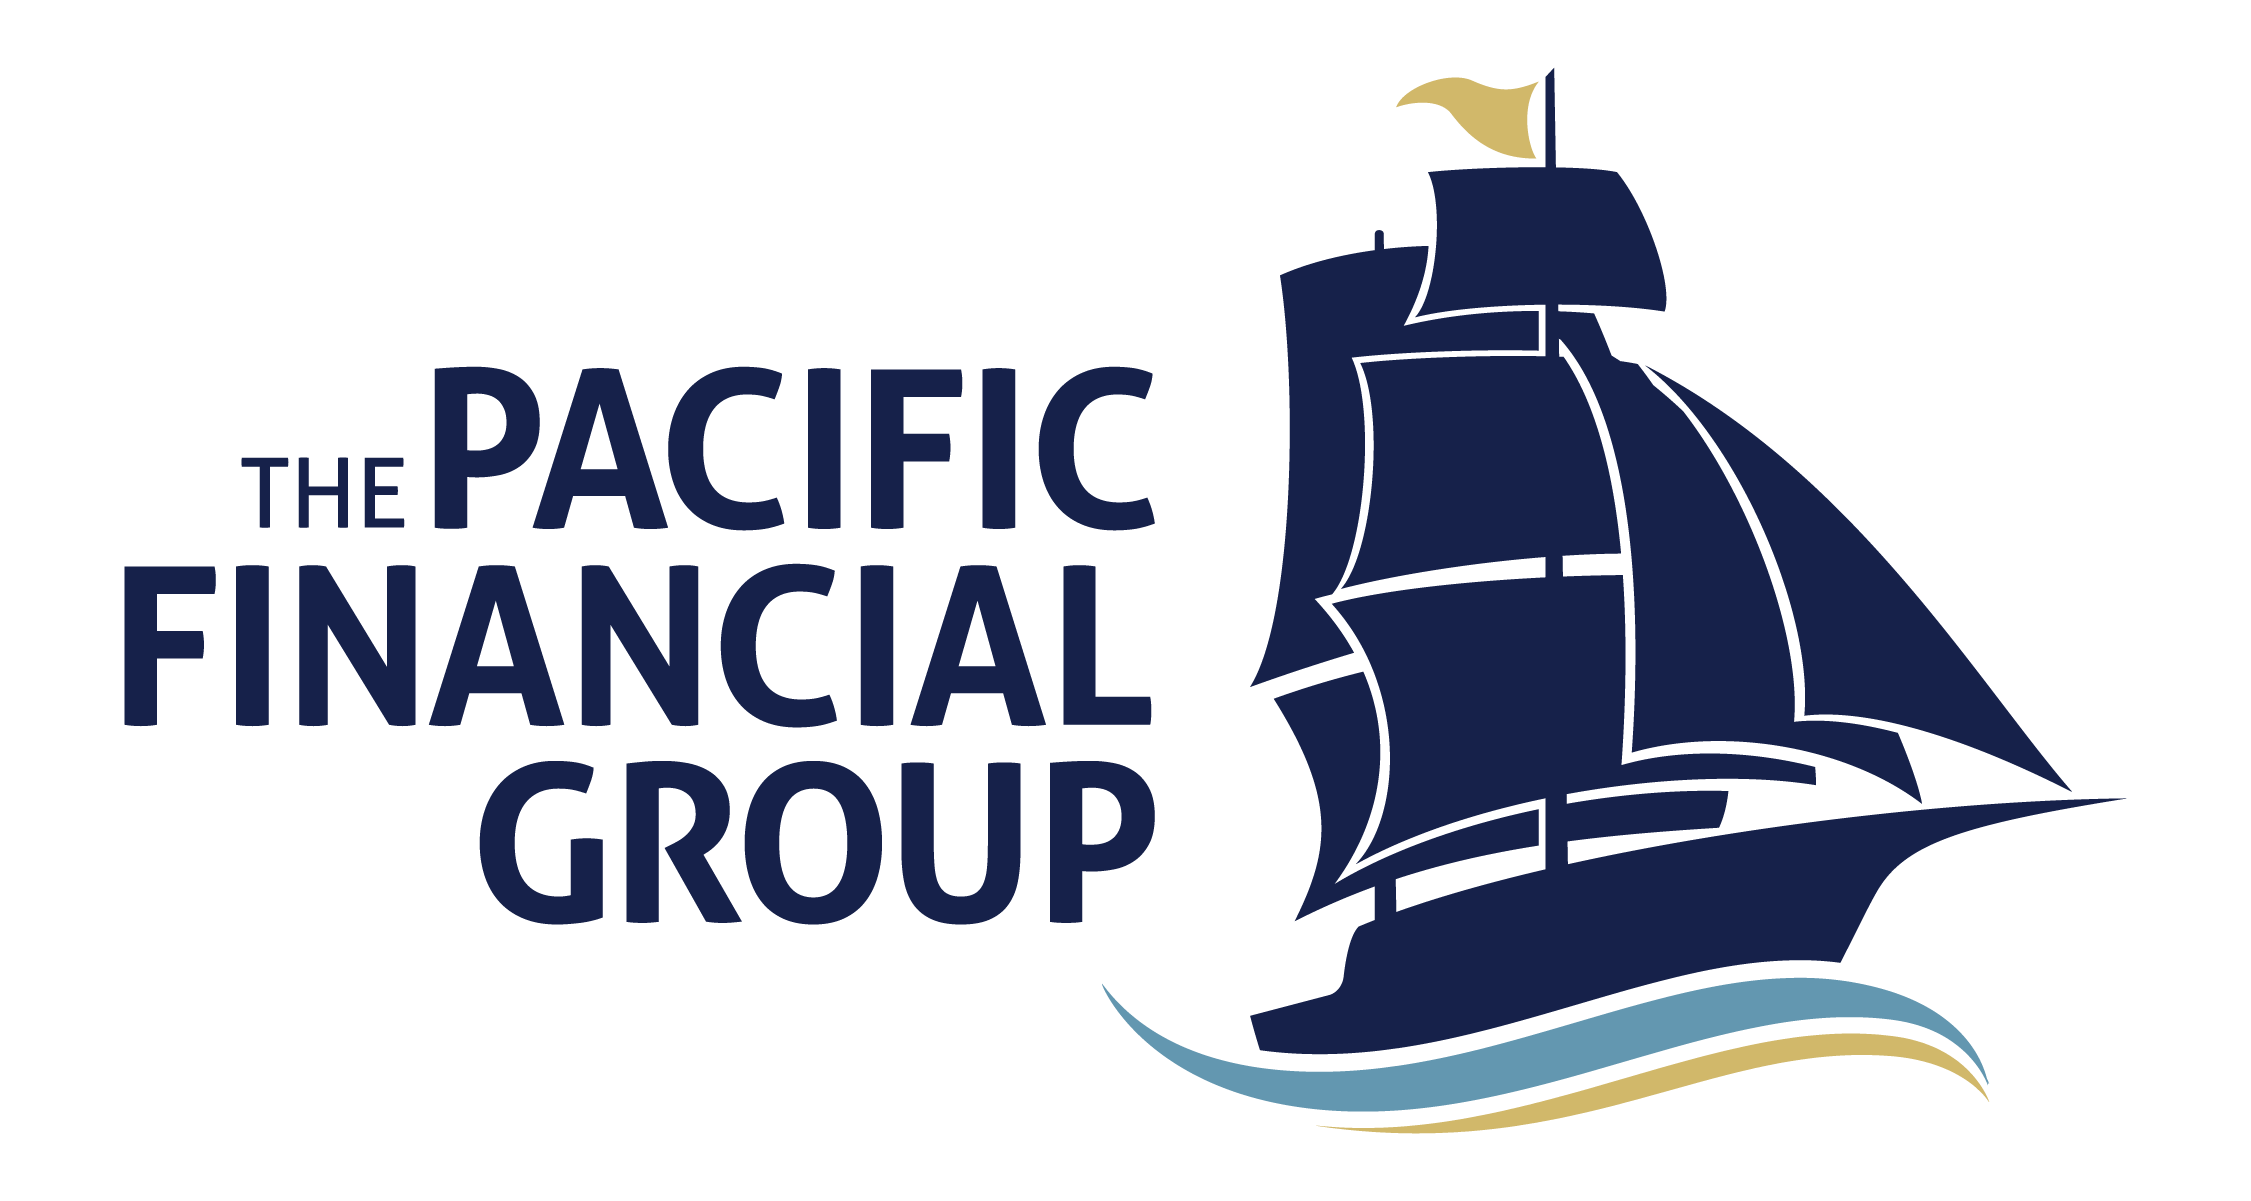 The Pacific Financial Group logo